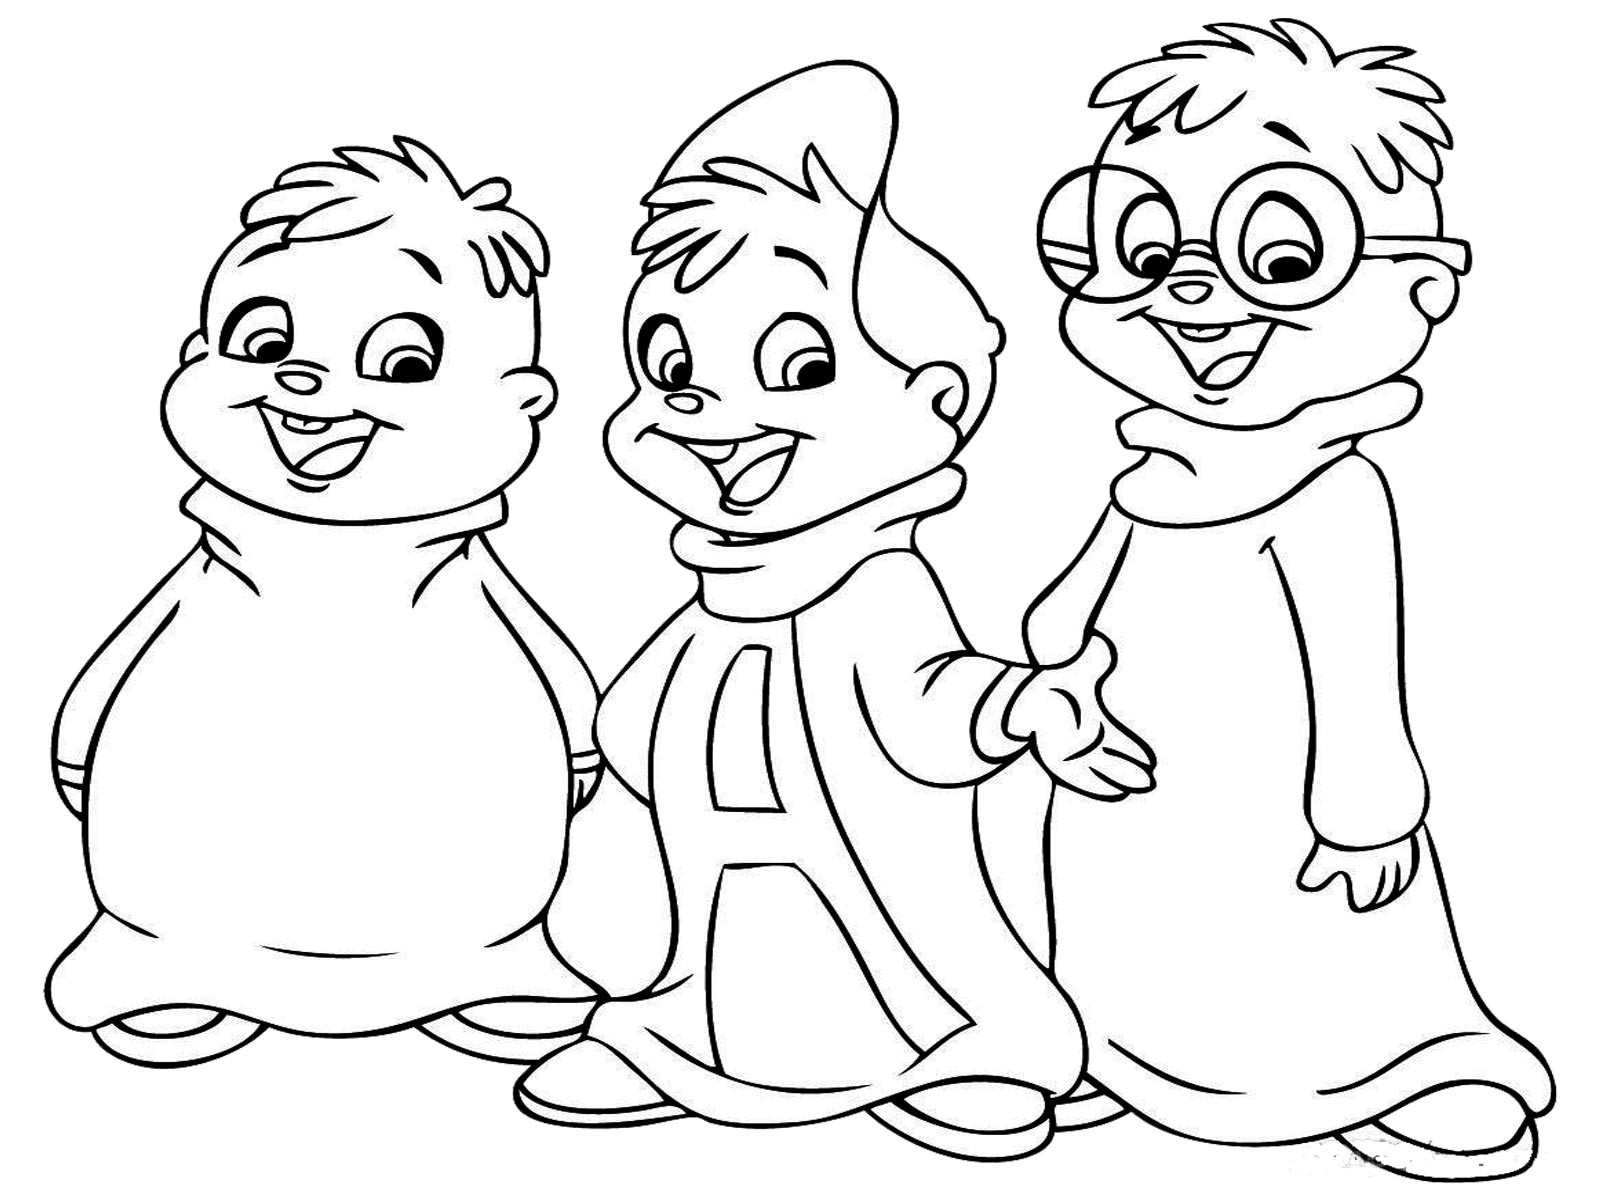 Coloring Pages Boys
 Coloring Pages for Boys 2018 Dr Odd